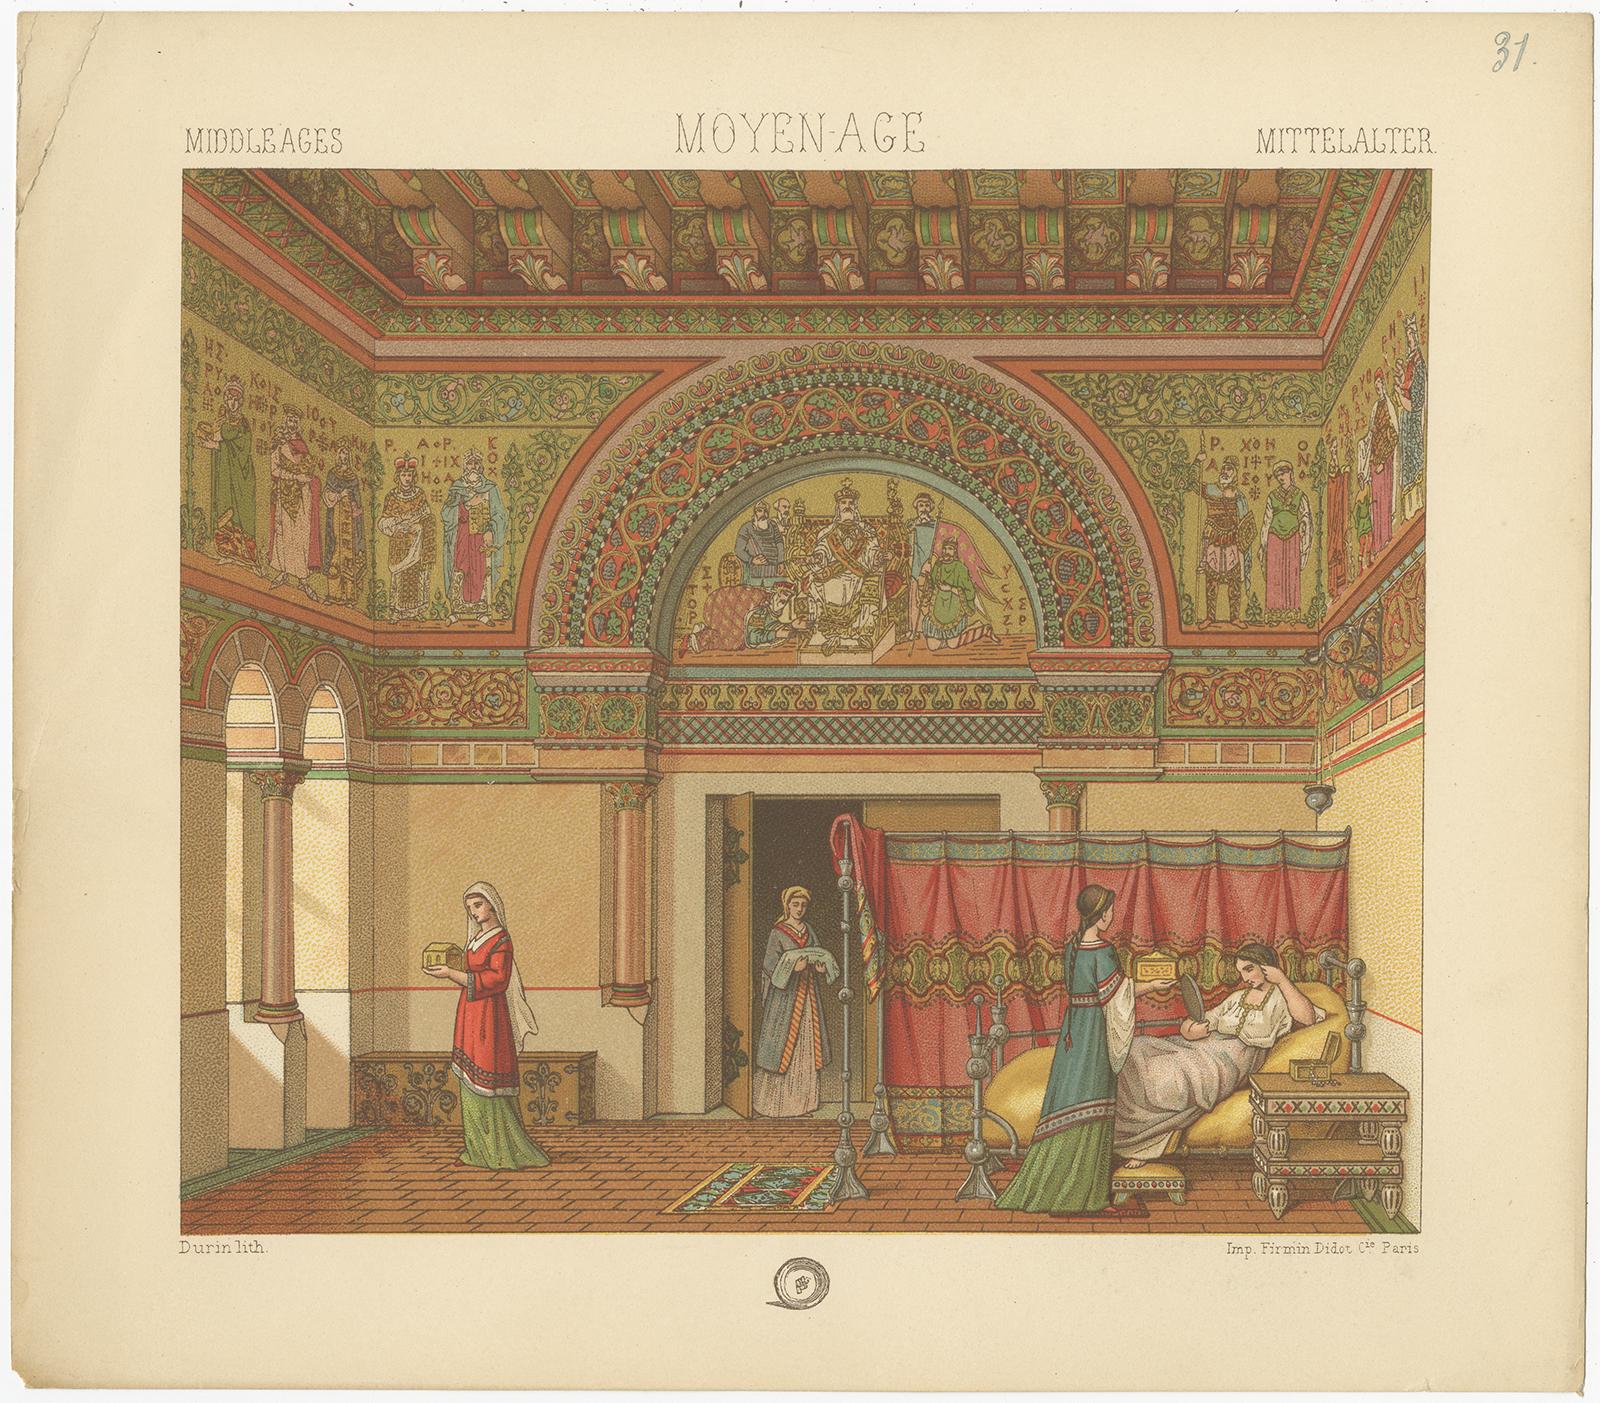 Antique print titled 'Middle Ages - Moyen Age - Mittelalter'. Chromolithograph of Middle Ages Interior. This print originates from 'Le Costume Historique' by M.A. Racinet. Published circa 1880.